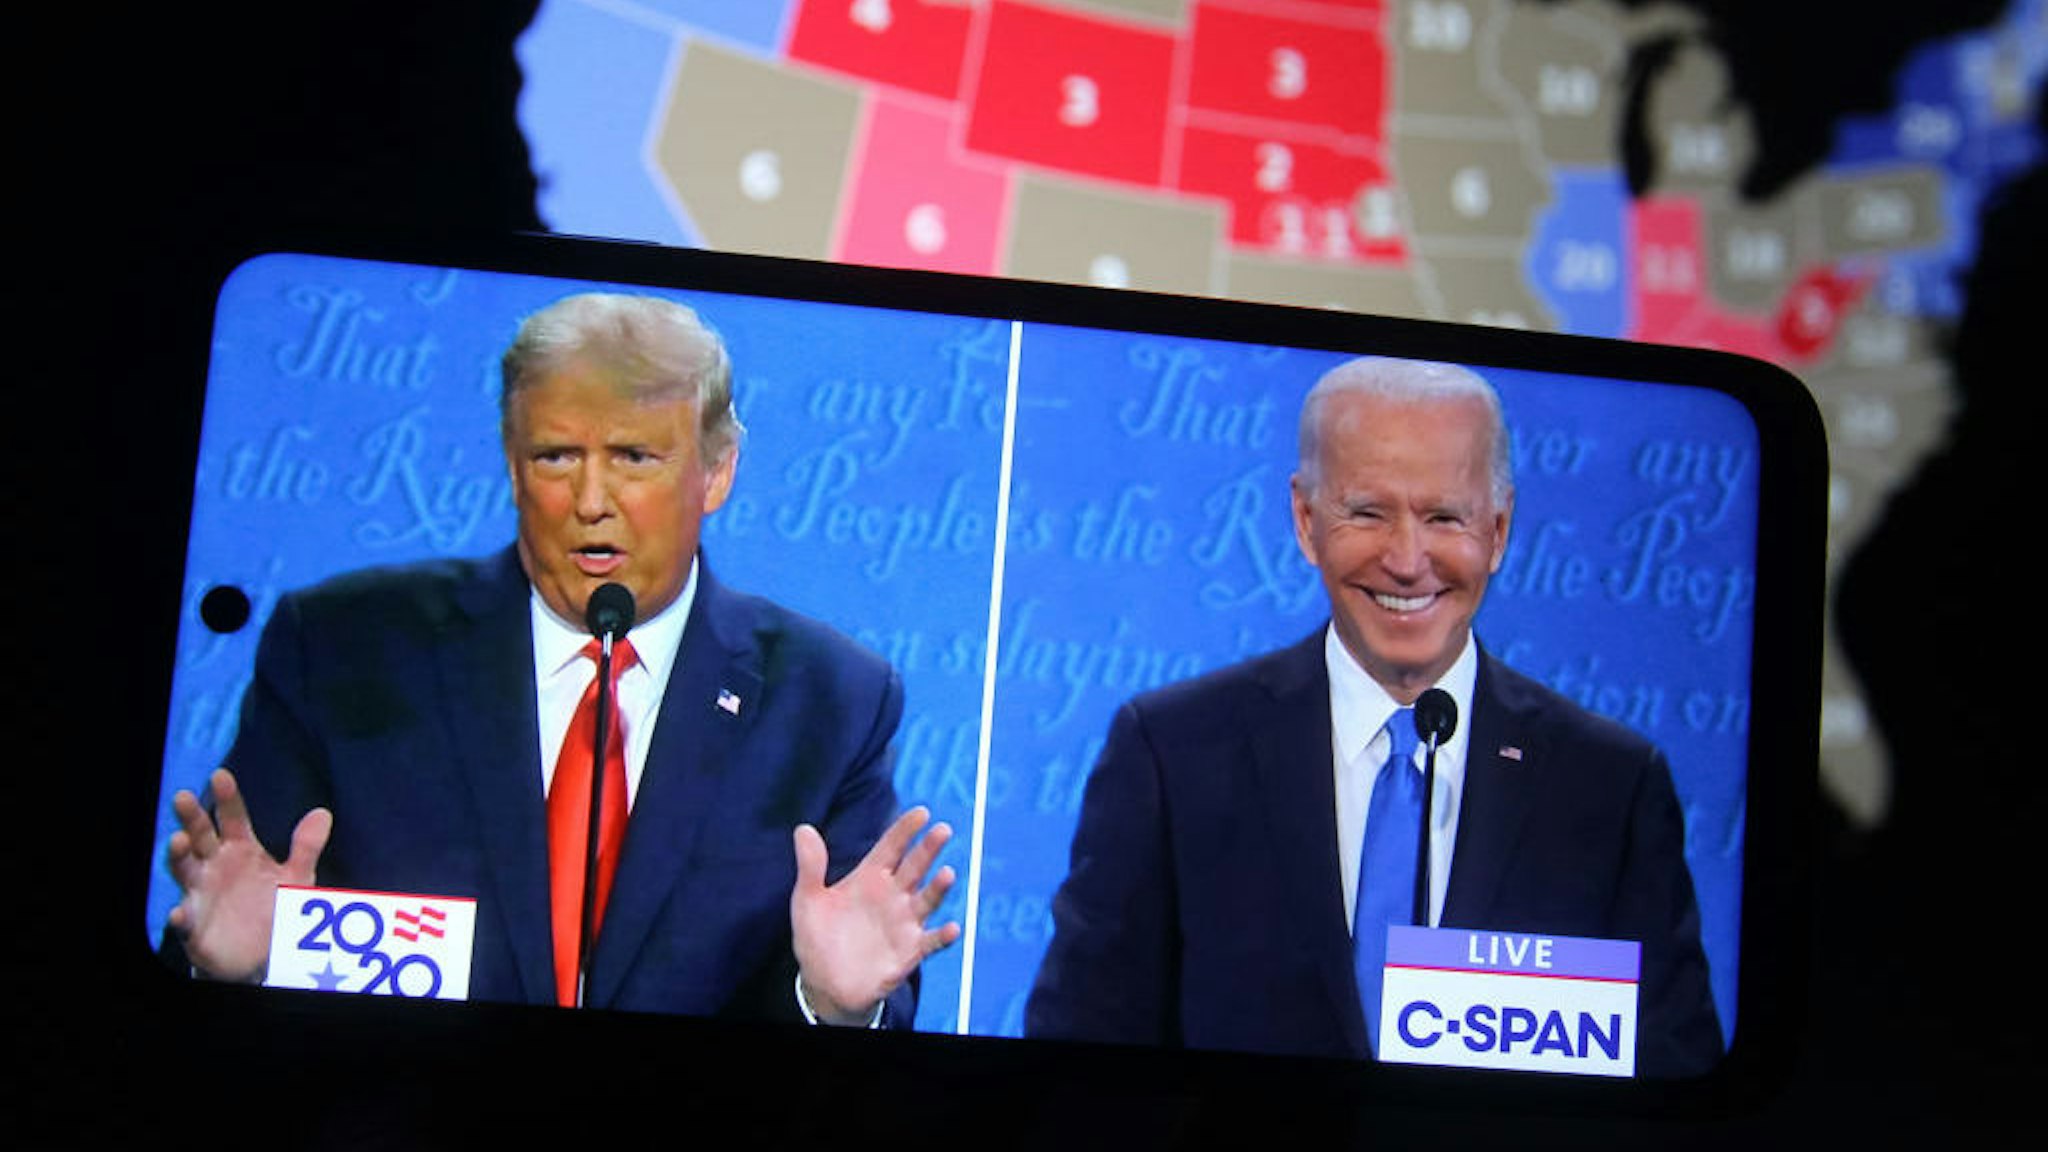 In this photo illustration the US President Donald Trump and Democratic presidential candidate and former US Vice President Joe Biden are seen during the final presidential debate displayed on a screen of a smartphone. The final presidential debate between President Donald Trump and former Vice President Joe Biden took place at Belmont University in Nashville, the U.S. on Thursday, October 22. United States presidential election scheduled for November 3, 2020. (Photo Illustration by Pavlo Conchar/SOPA Images/LightRocket via Getty Images)